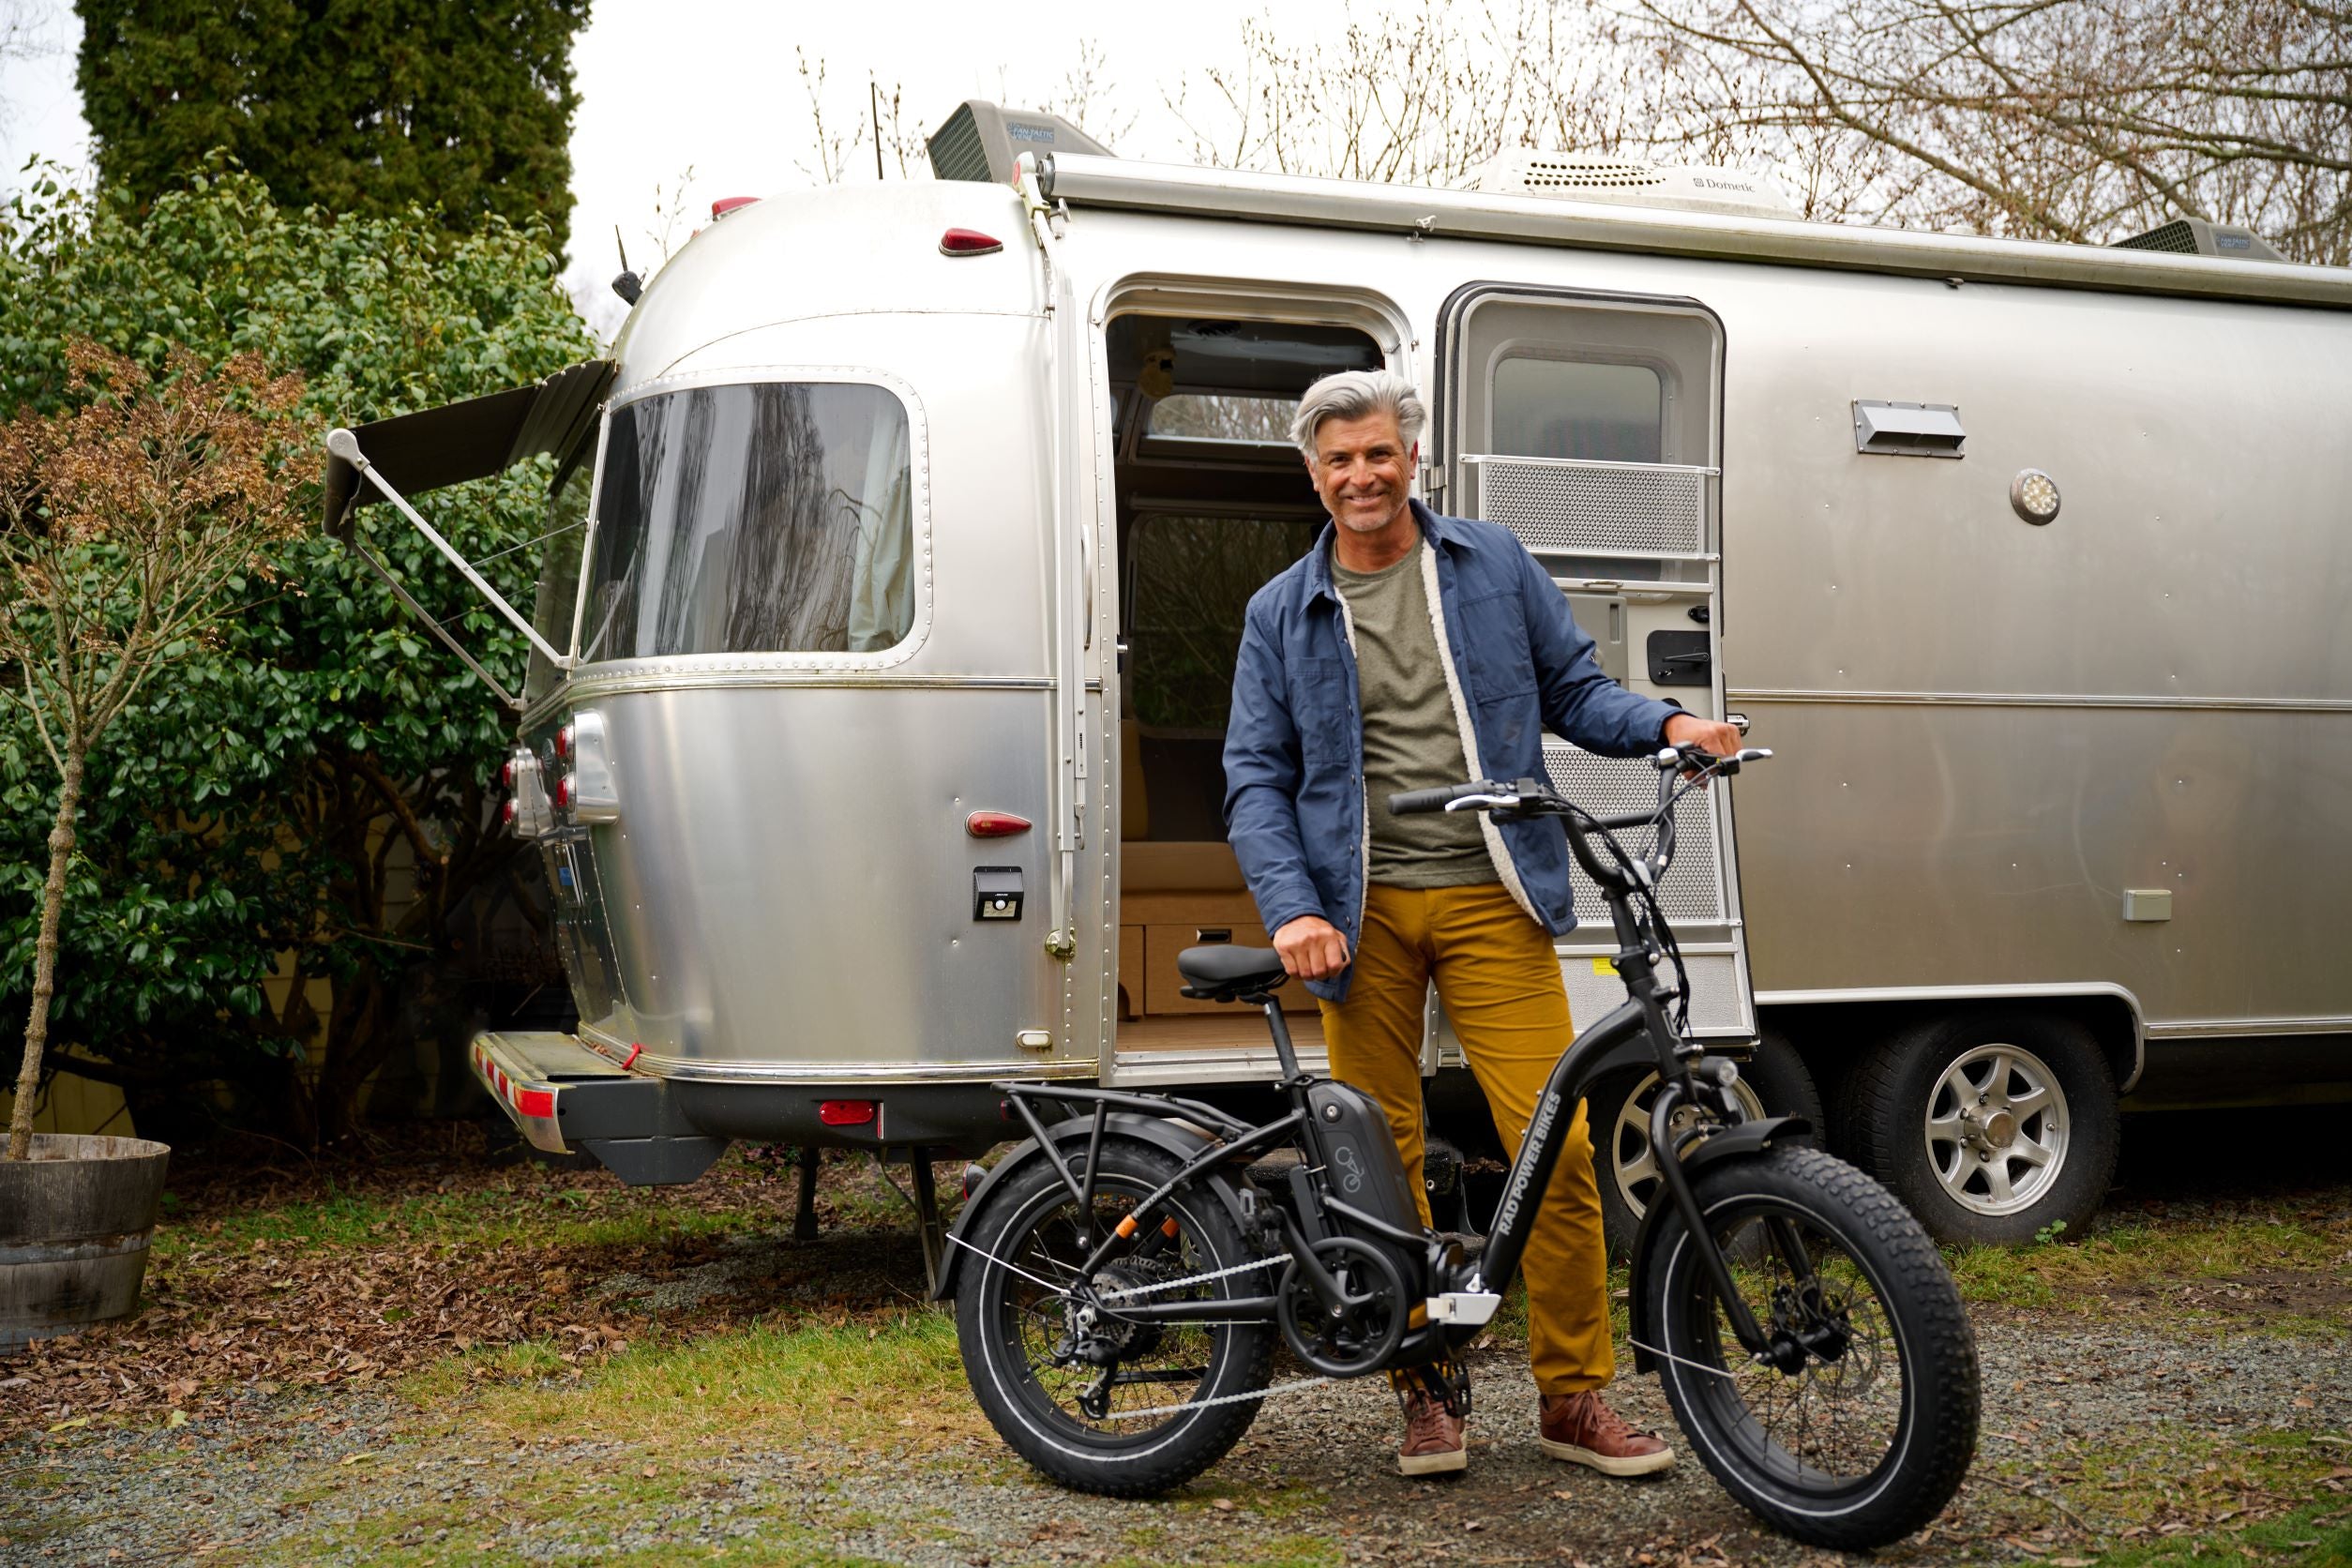 Man stands in front of RV with new RadExpand 5.